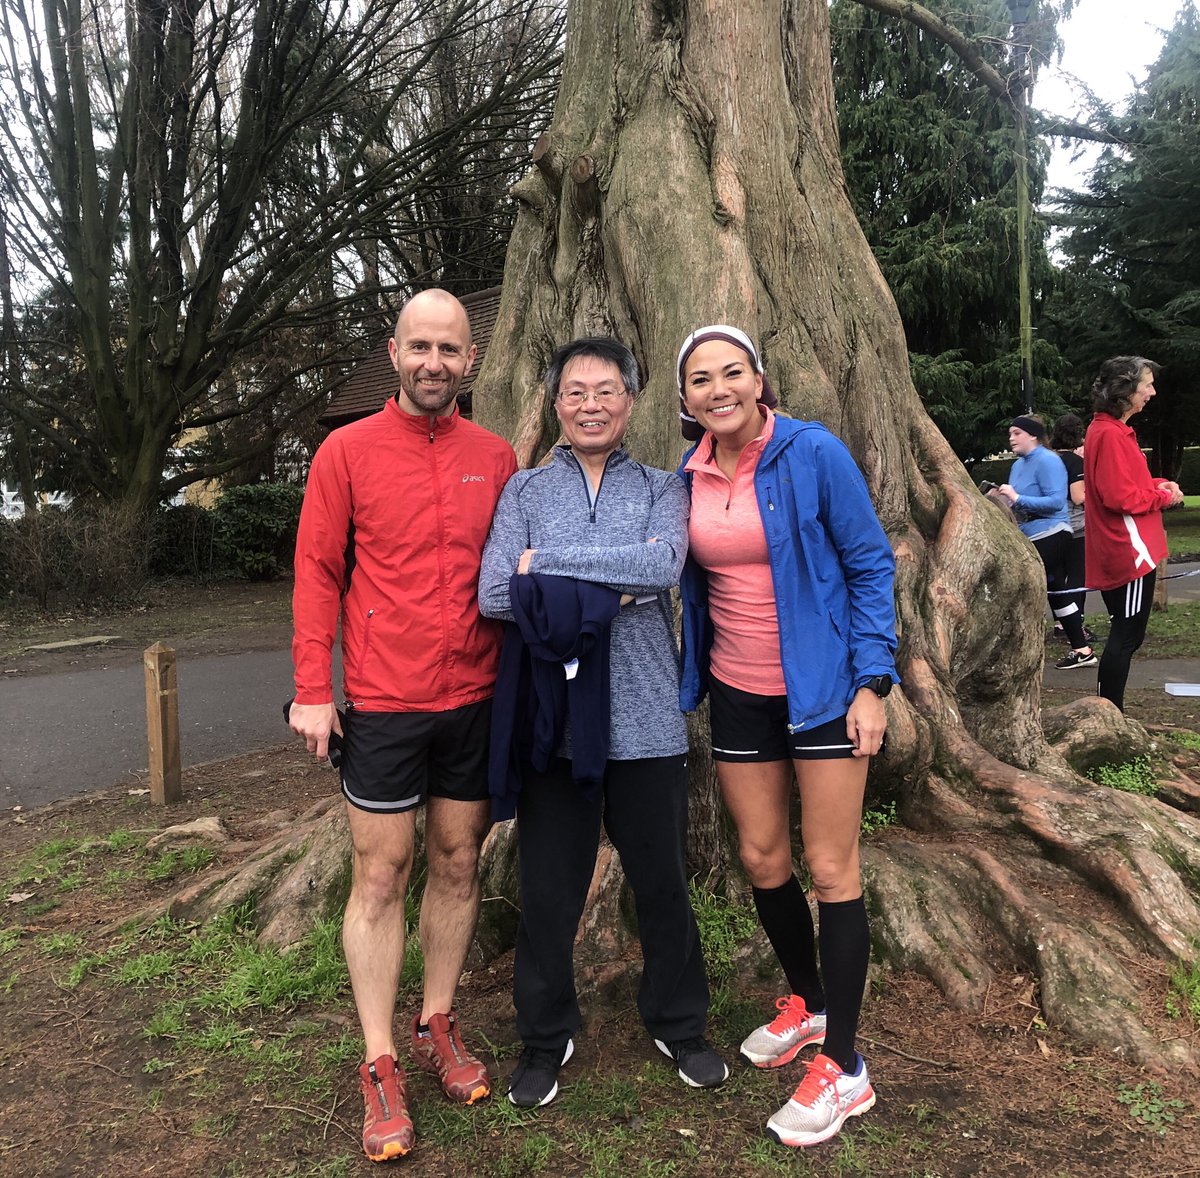 At the age of 70 my dad started running! Started 3 months ago, and slowly built it up to 3k. Today he finished his first ever 5K at @parkrunUK he didn’t stop & was absolutely delighted when he finished 🥰 Huge thanks to @Wokingpark for making him feel so welcome 🌳💚 #loveparkrun